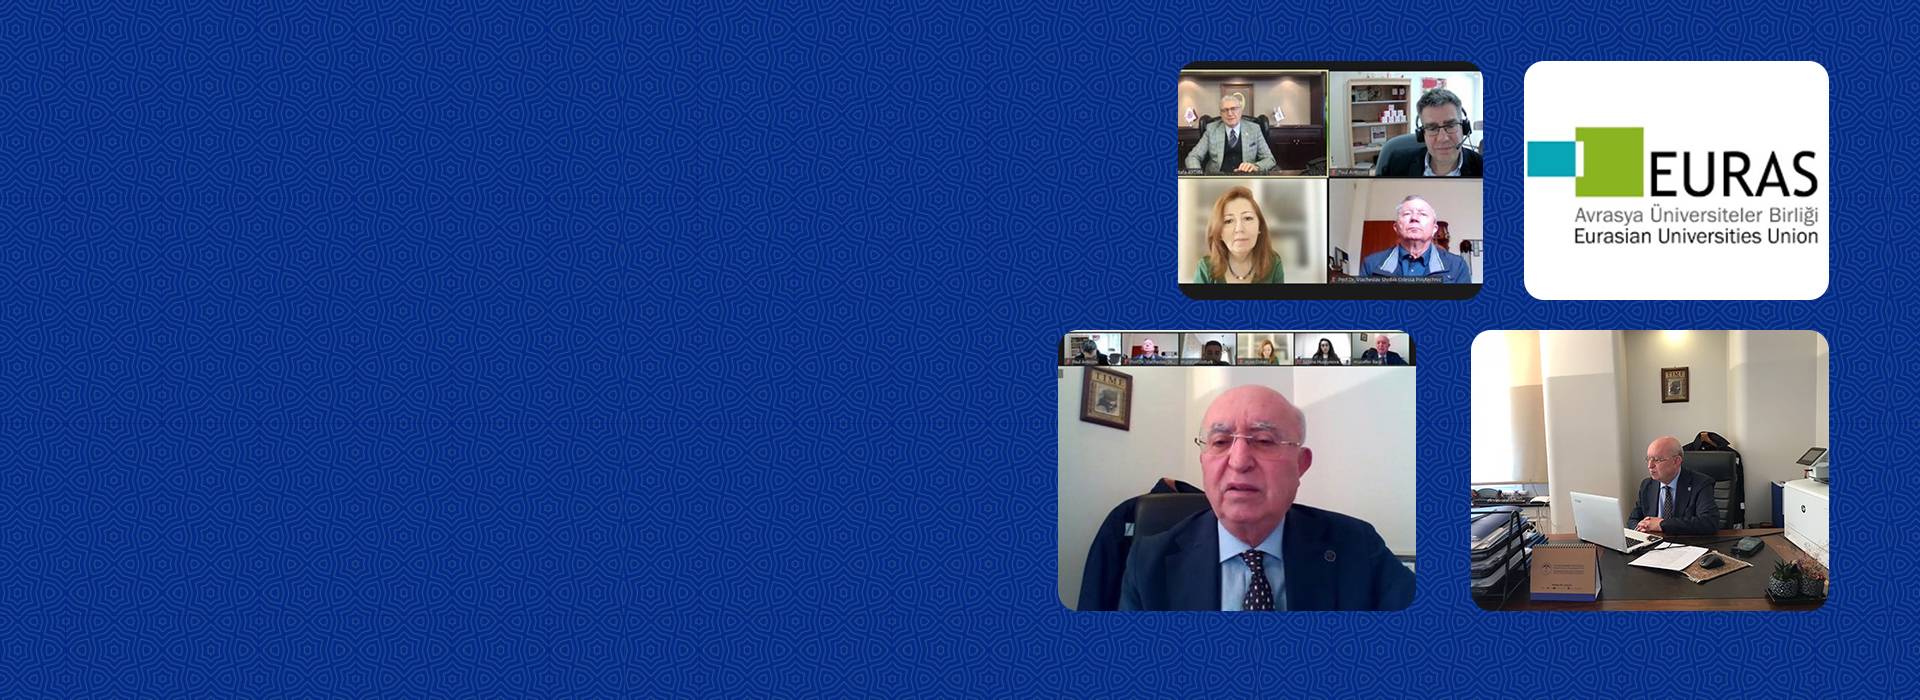 Ukraine's humanitarian crisis was discussed at webinar chaired by IBC Vice President Muzaffer Baca